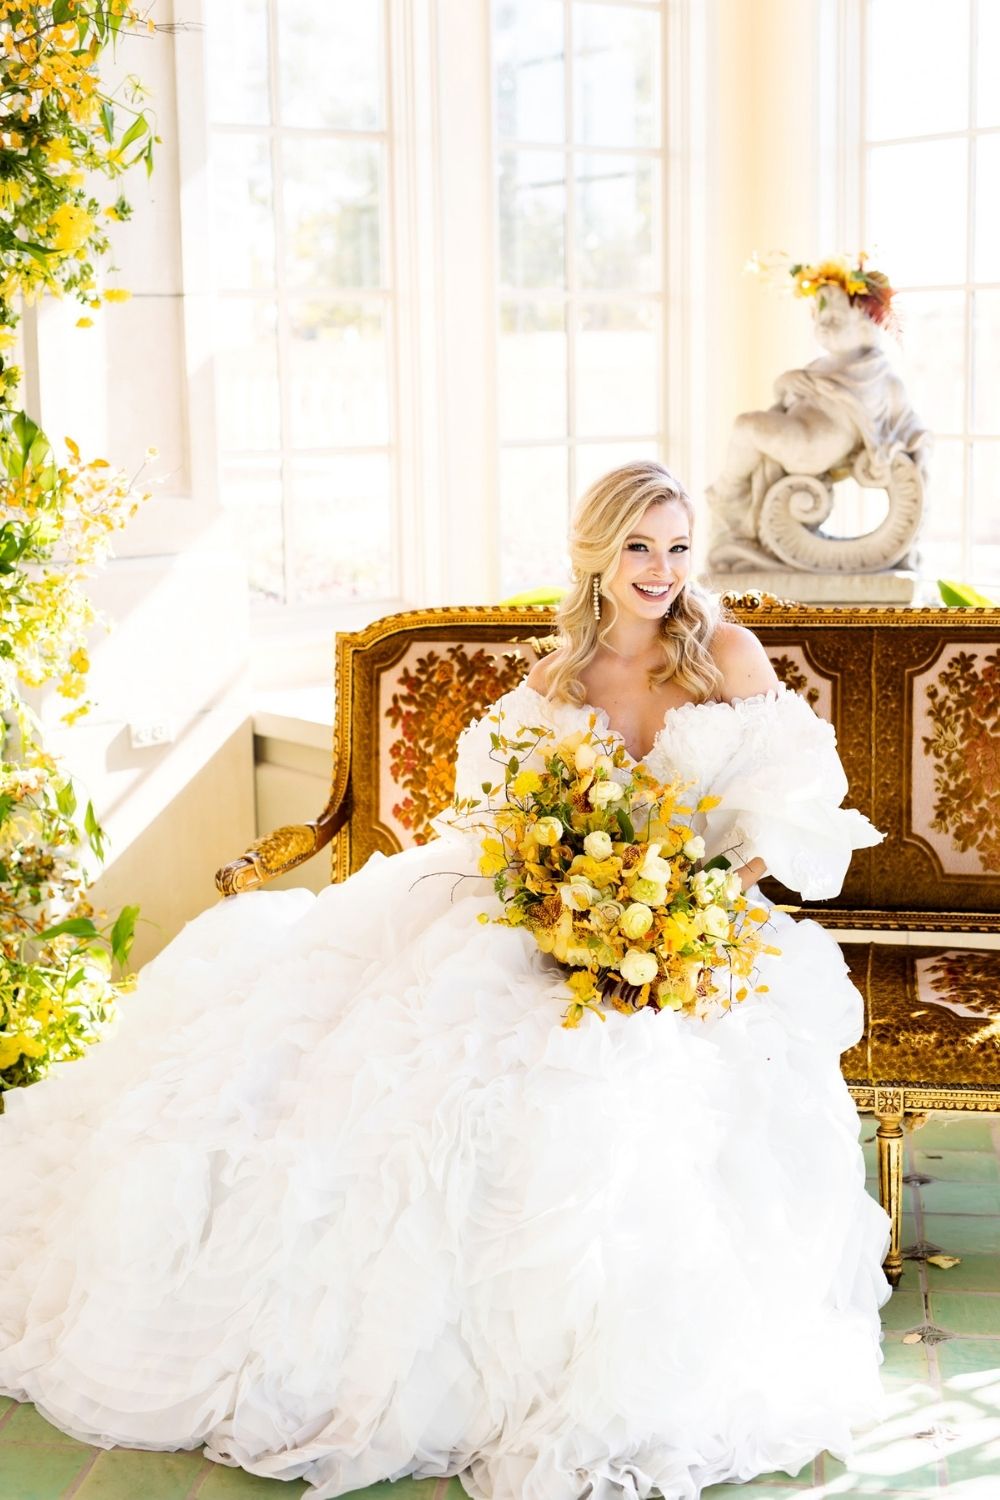 Bride in a white Ball gown wedding dress sitting on a gold chair